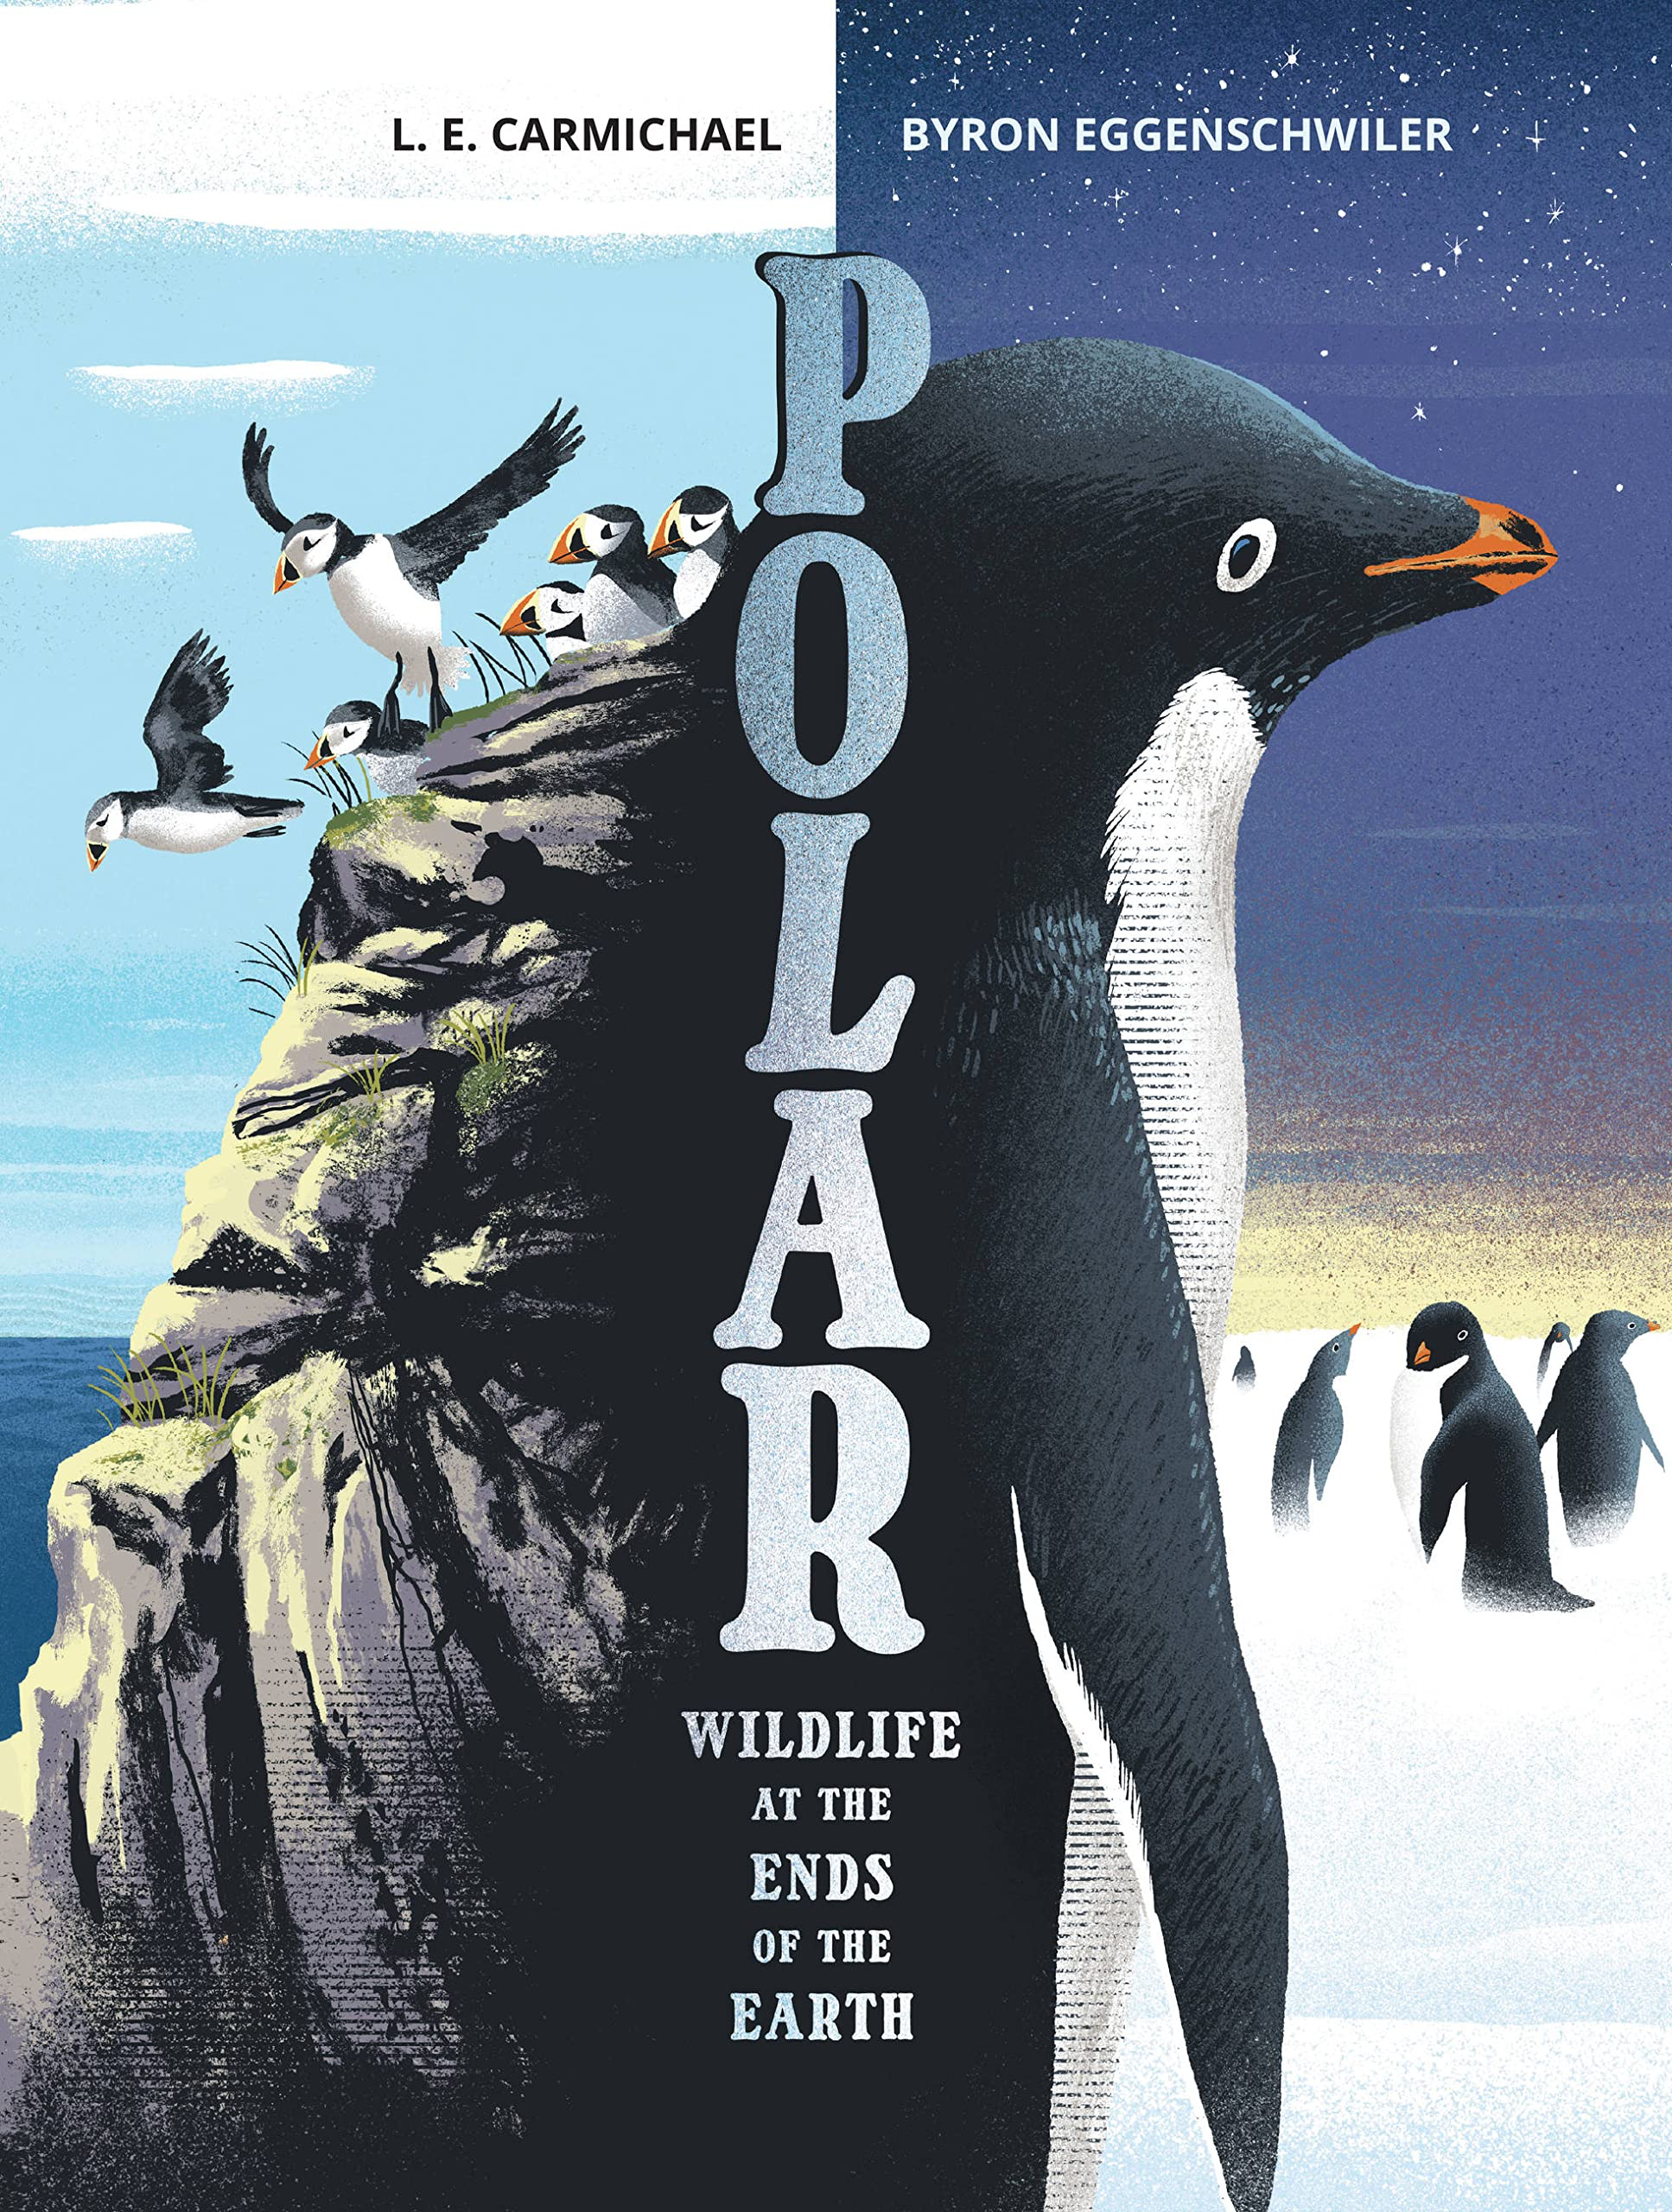 The cover of POLAR: WILDLIFE AT THE ENDS OF THE EARTH, by L. E. Carmichael